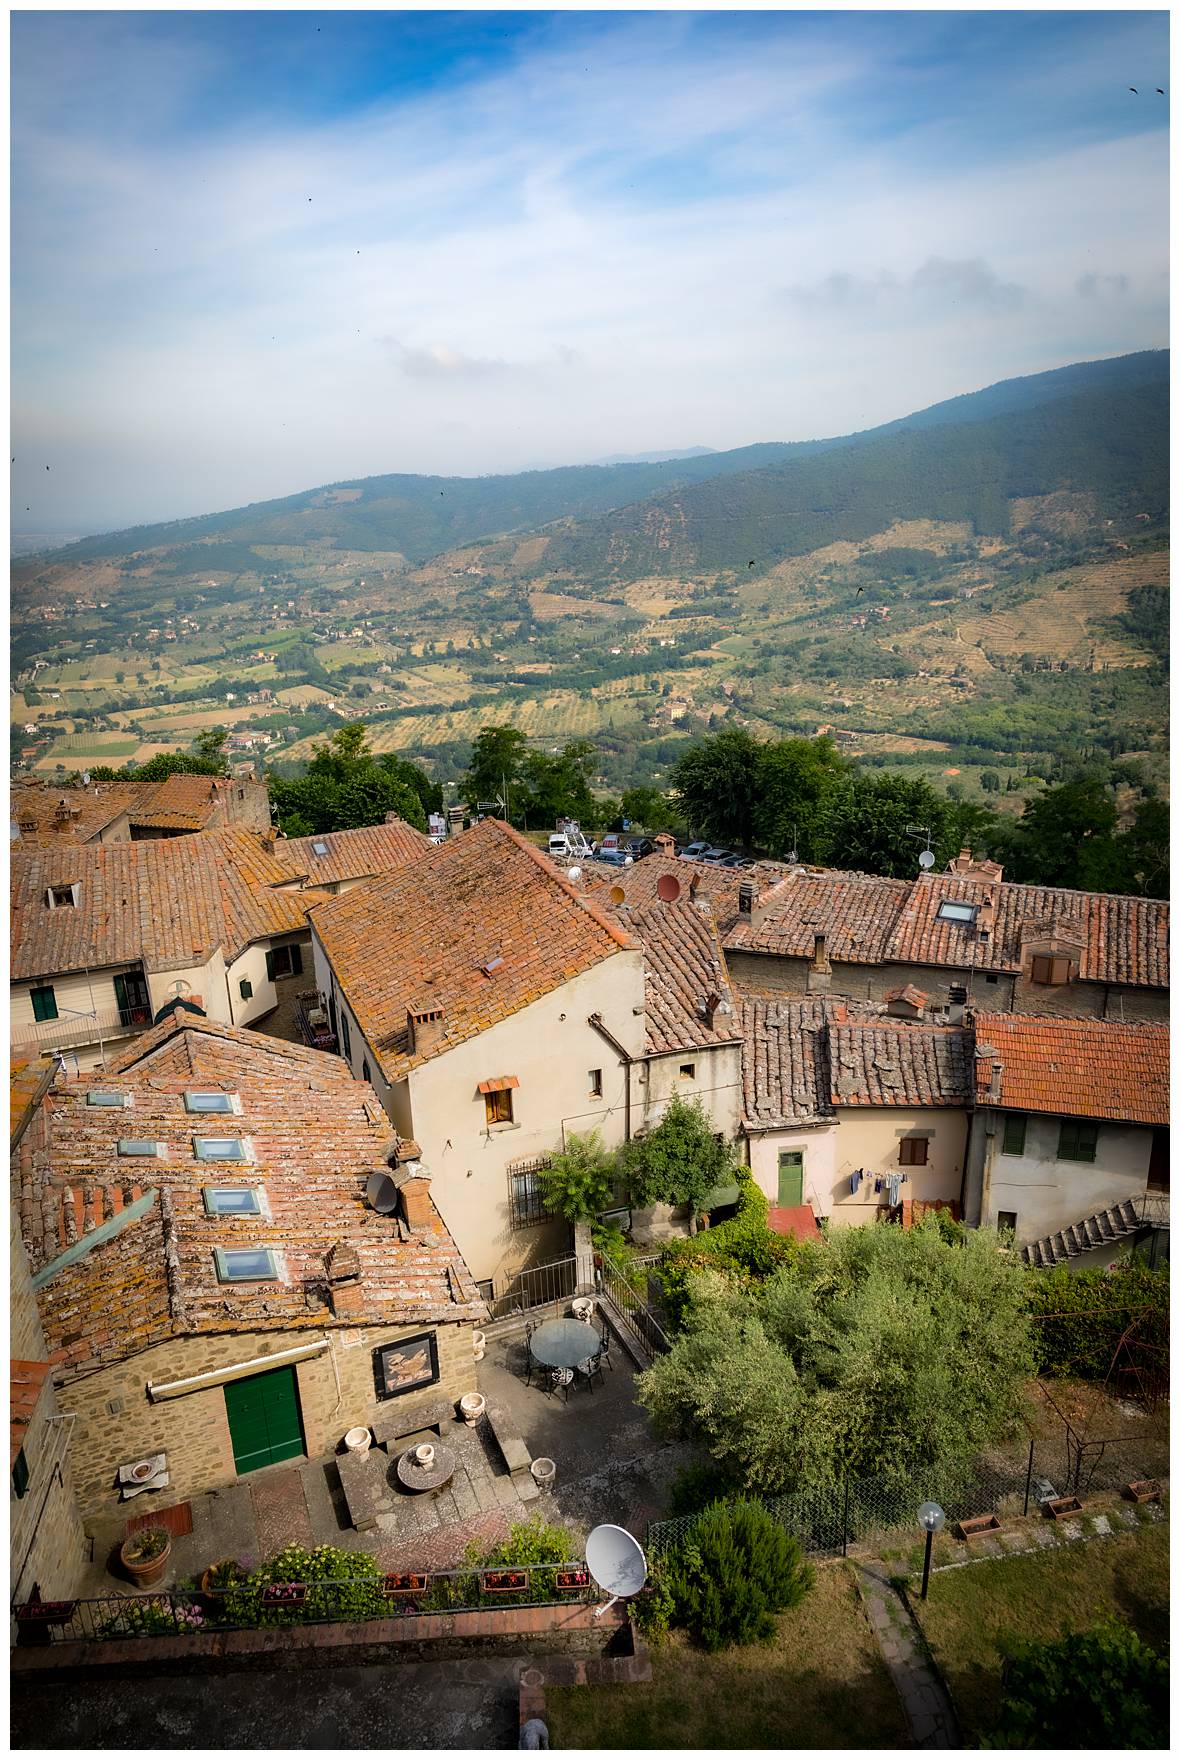 Journey of Doing - Much has been said about Cortona Tuscany and it should be experiences as more than a day trip in Tuscany. Click here for more ideas on why and where to stay and eat!